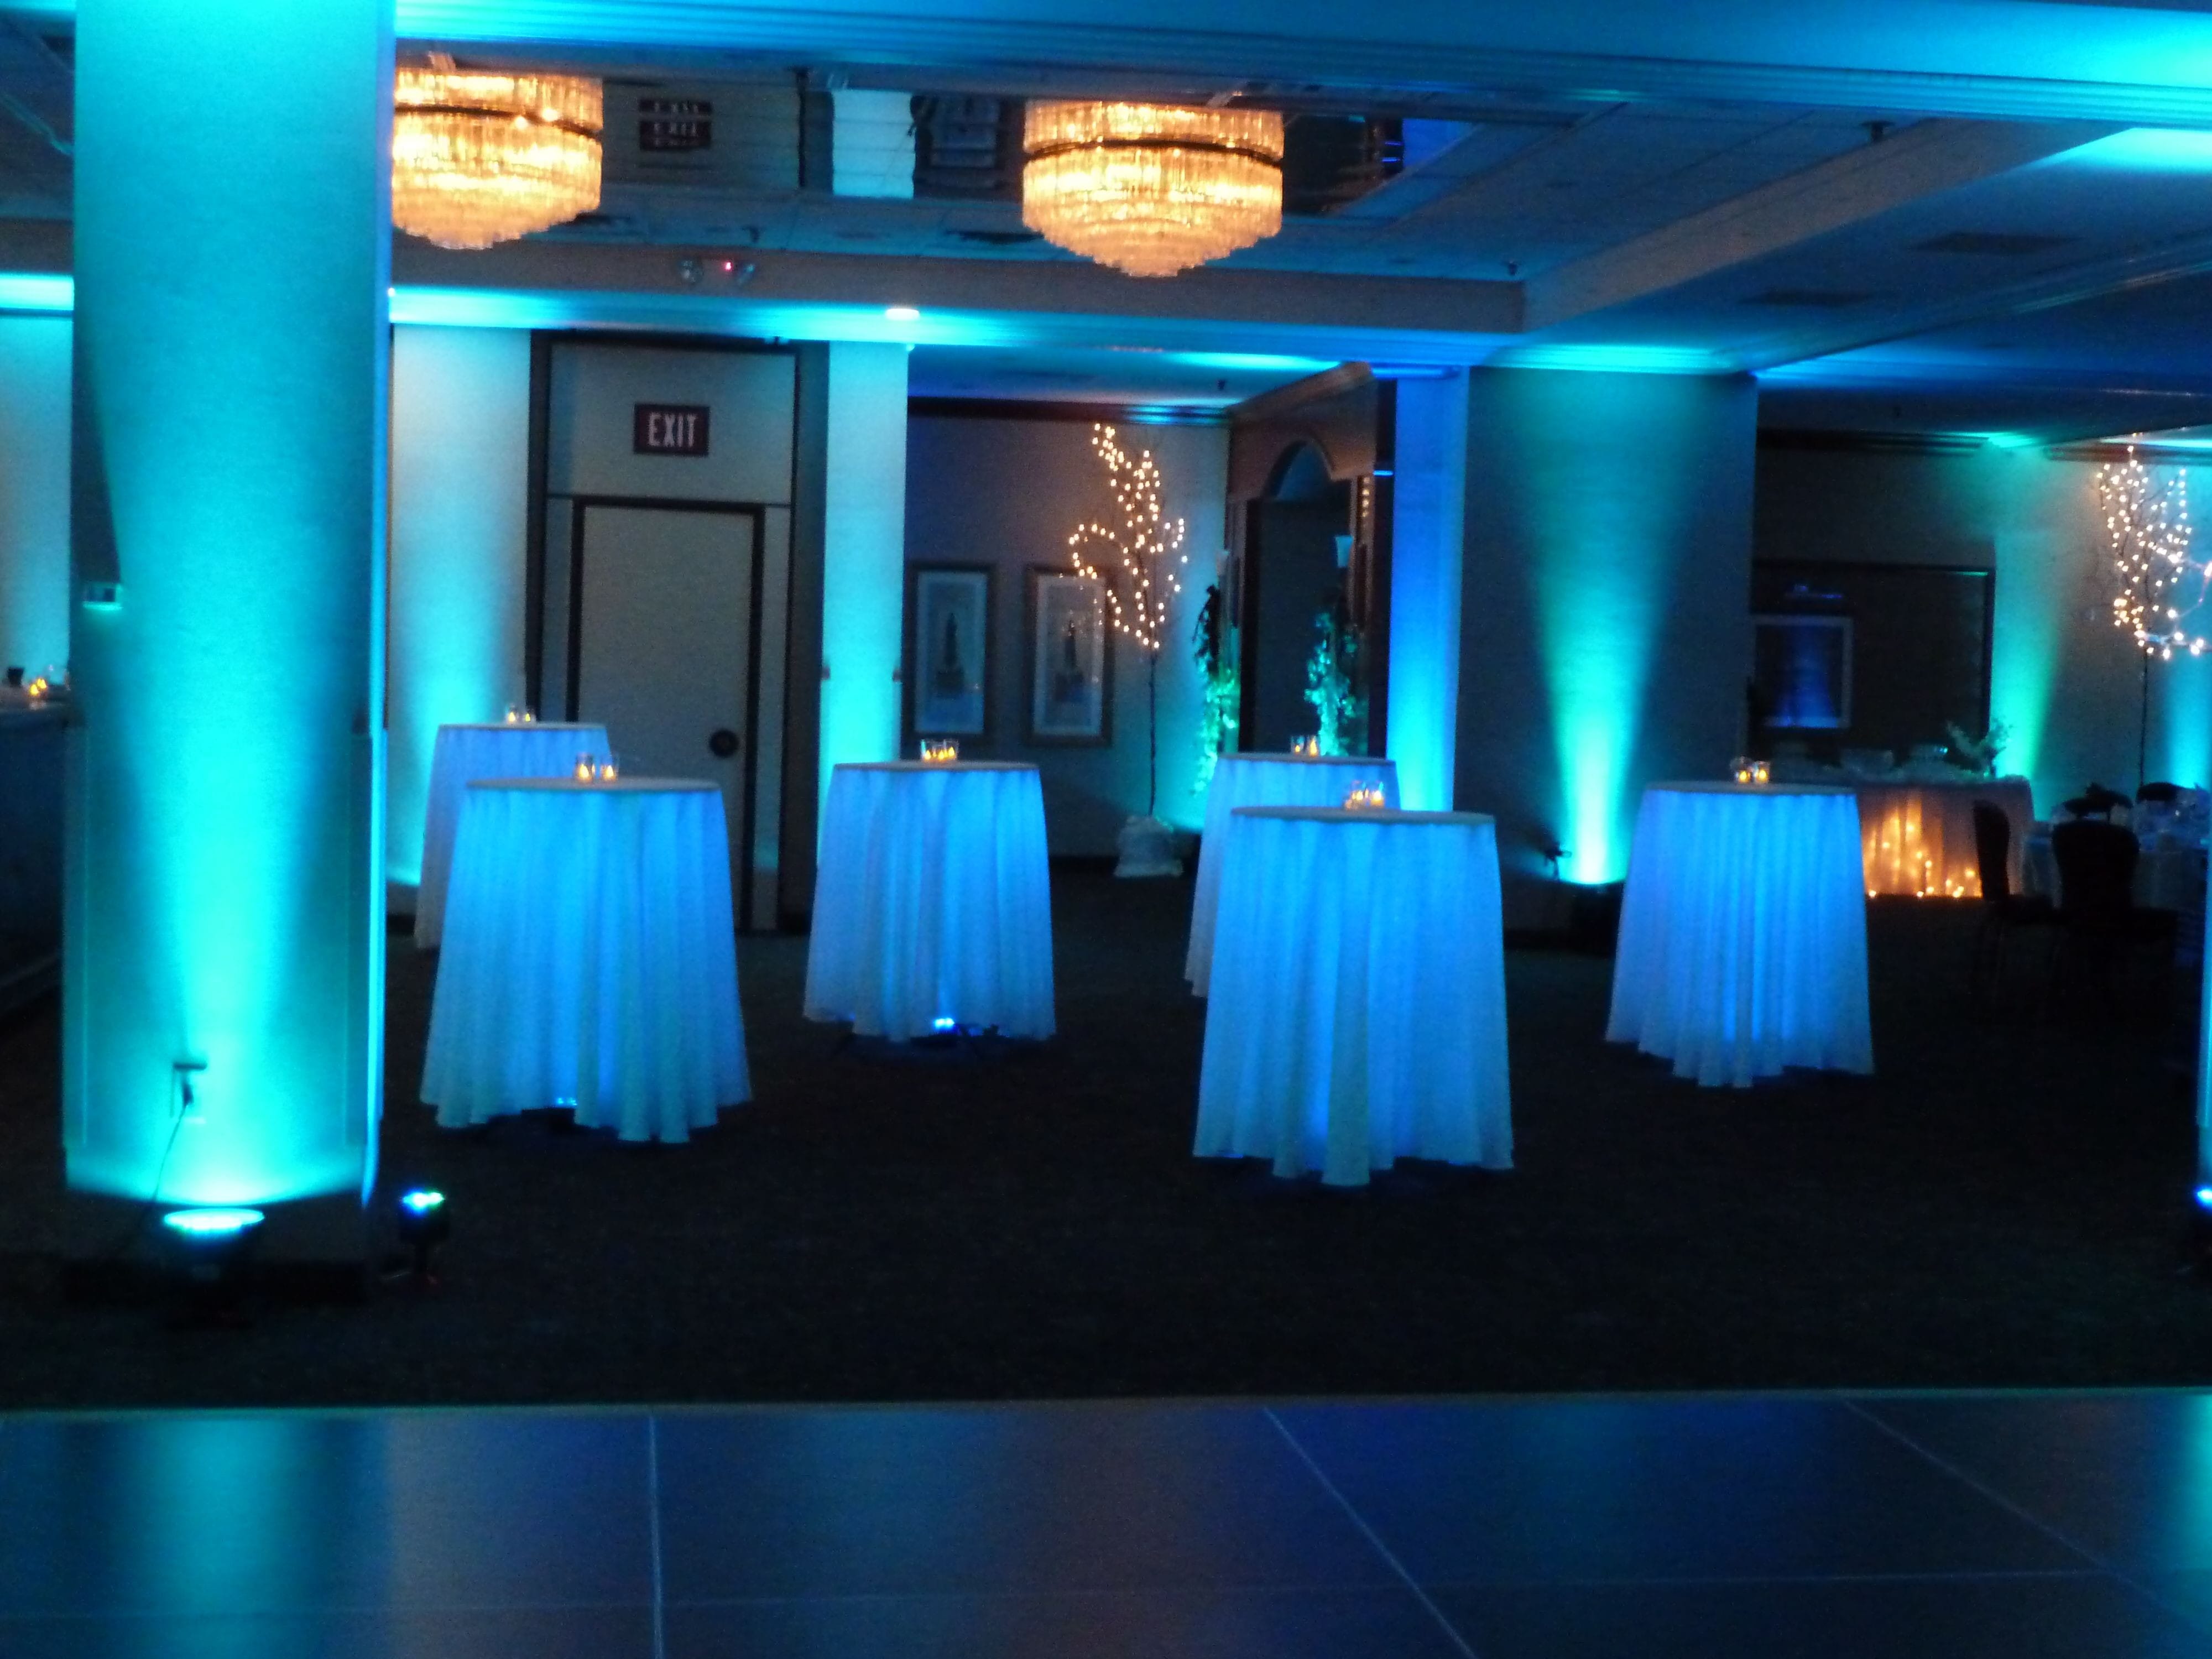 Holiday Inn, Duluth
Great Lakes Ballroom with blue wedding lighting. Glowing cocktail tables.